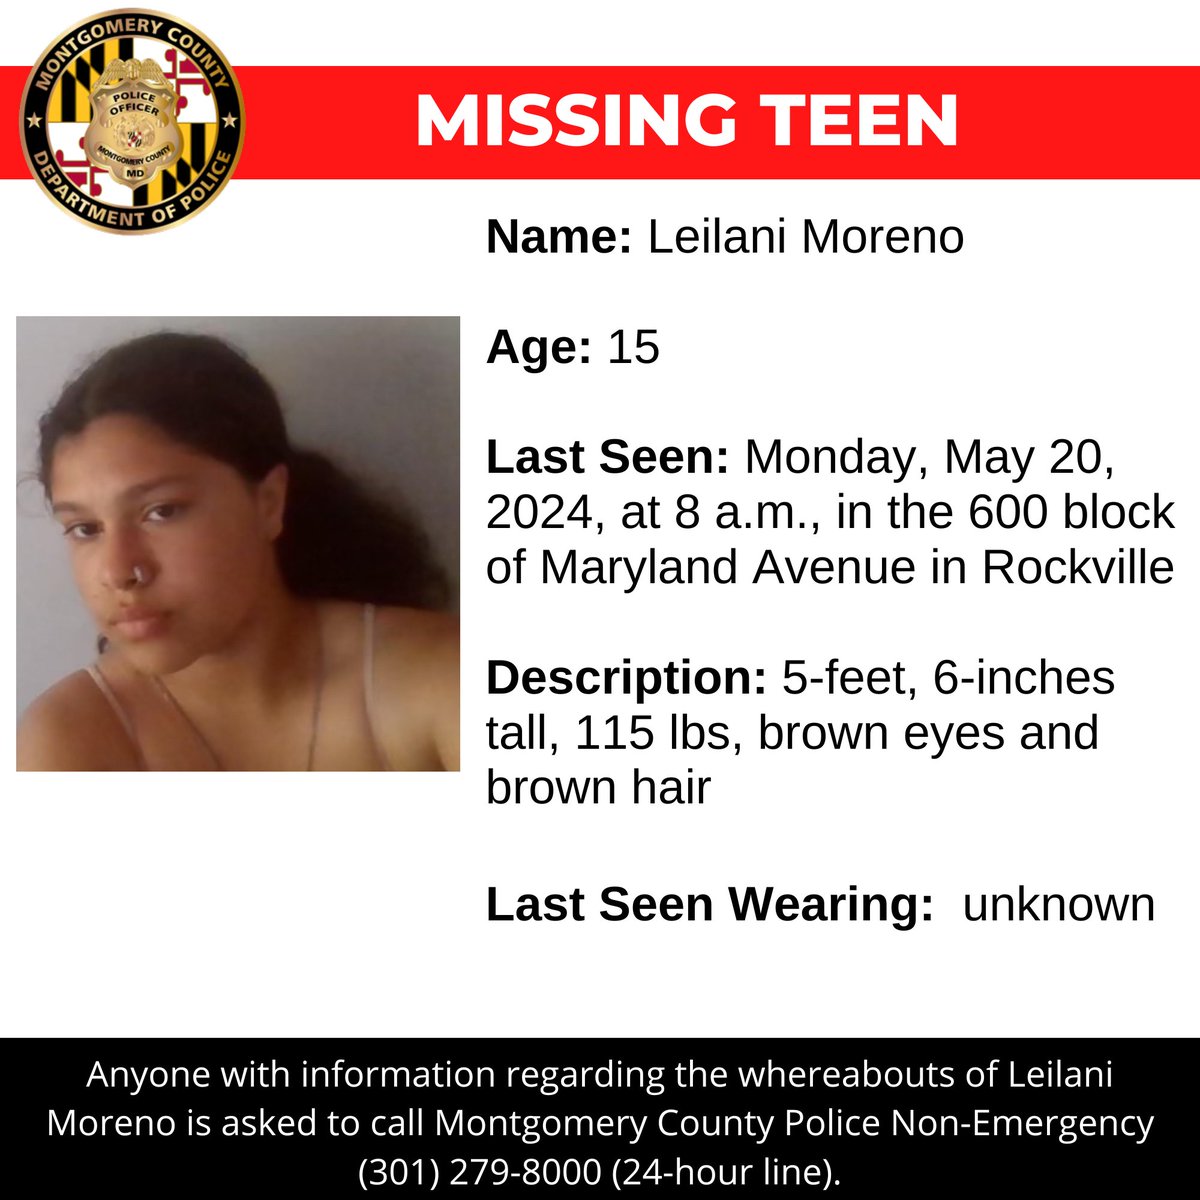 Concern for Missing Fifteen-Year-Old www2.montgomerycountymd.gov/mcgportalapps/… #mcpnews #missingperson